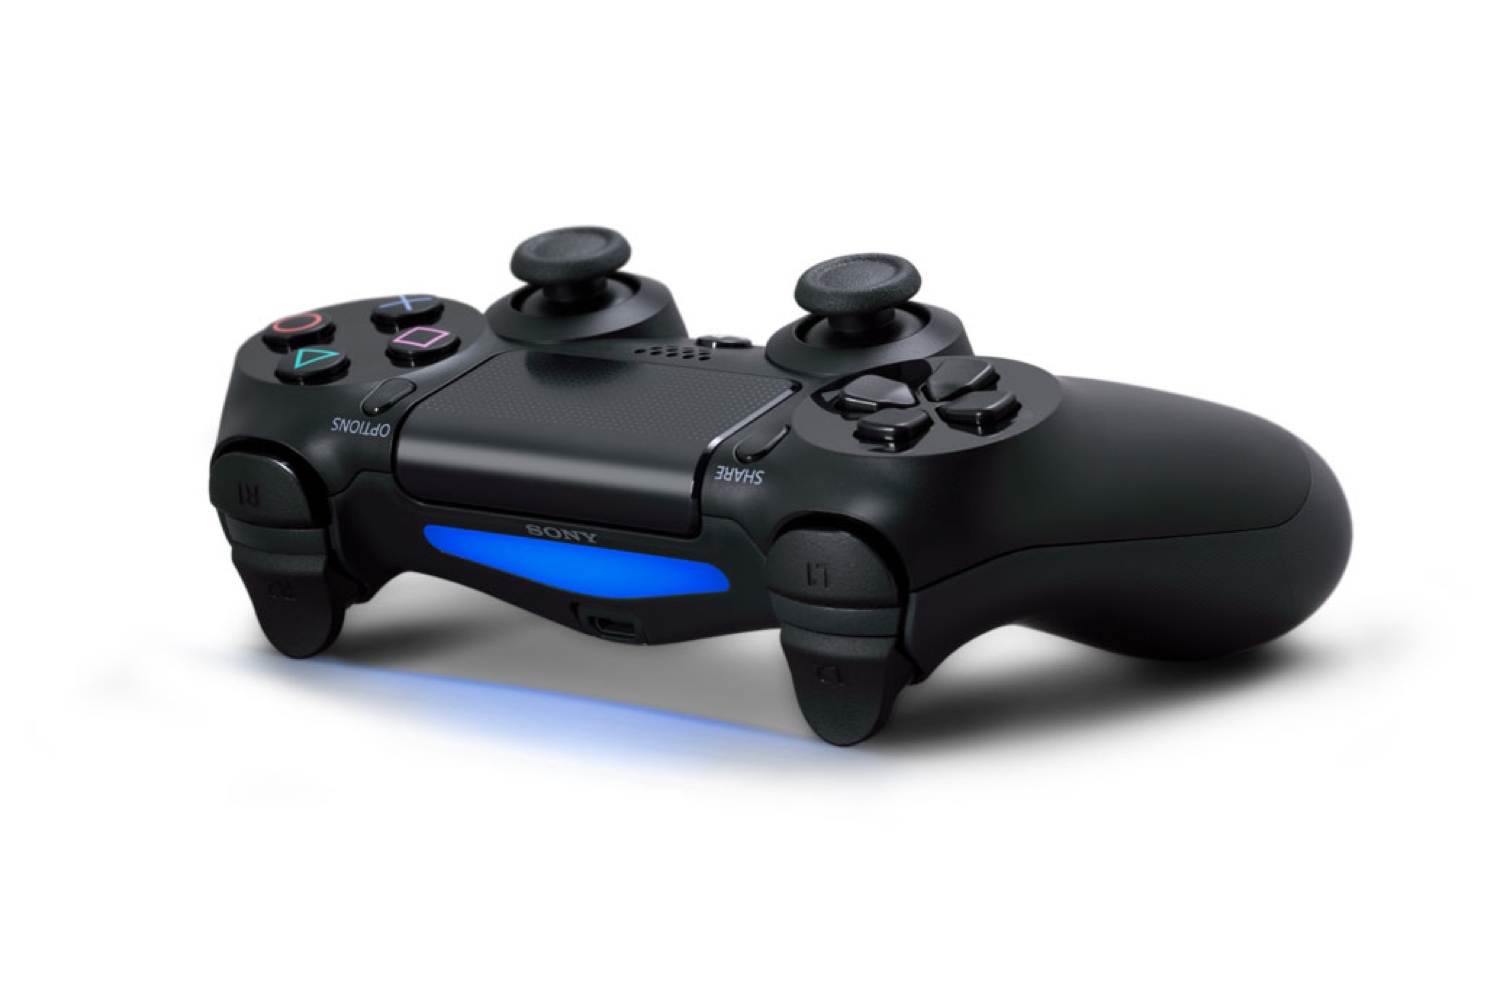 Afdeling gear Philadelphia The PS4 DualShock 4 GamePad Is Now Bluetooth Compatible with the PS3 | Time